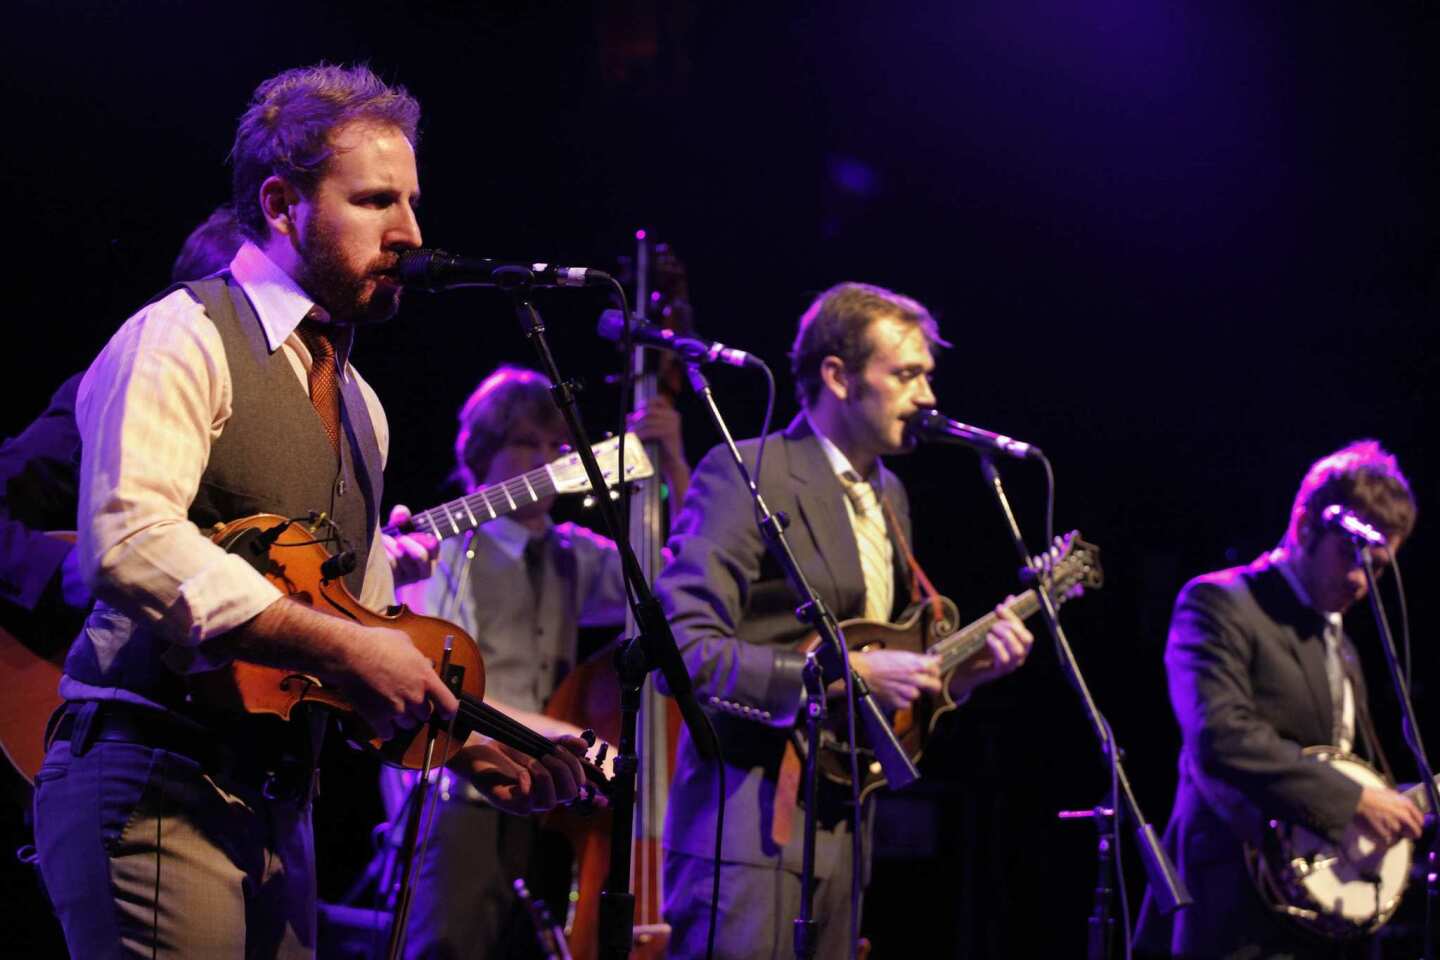 UNDERRATED: The Punch Brothers